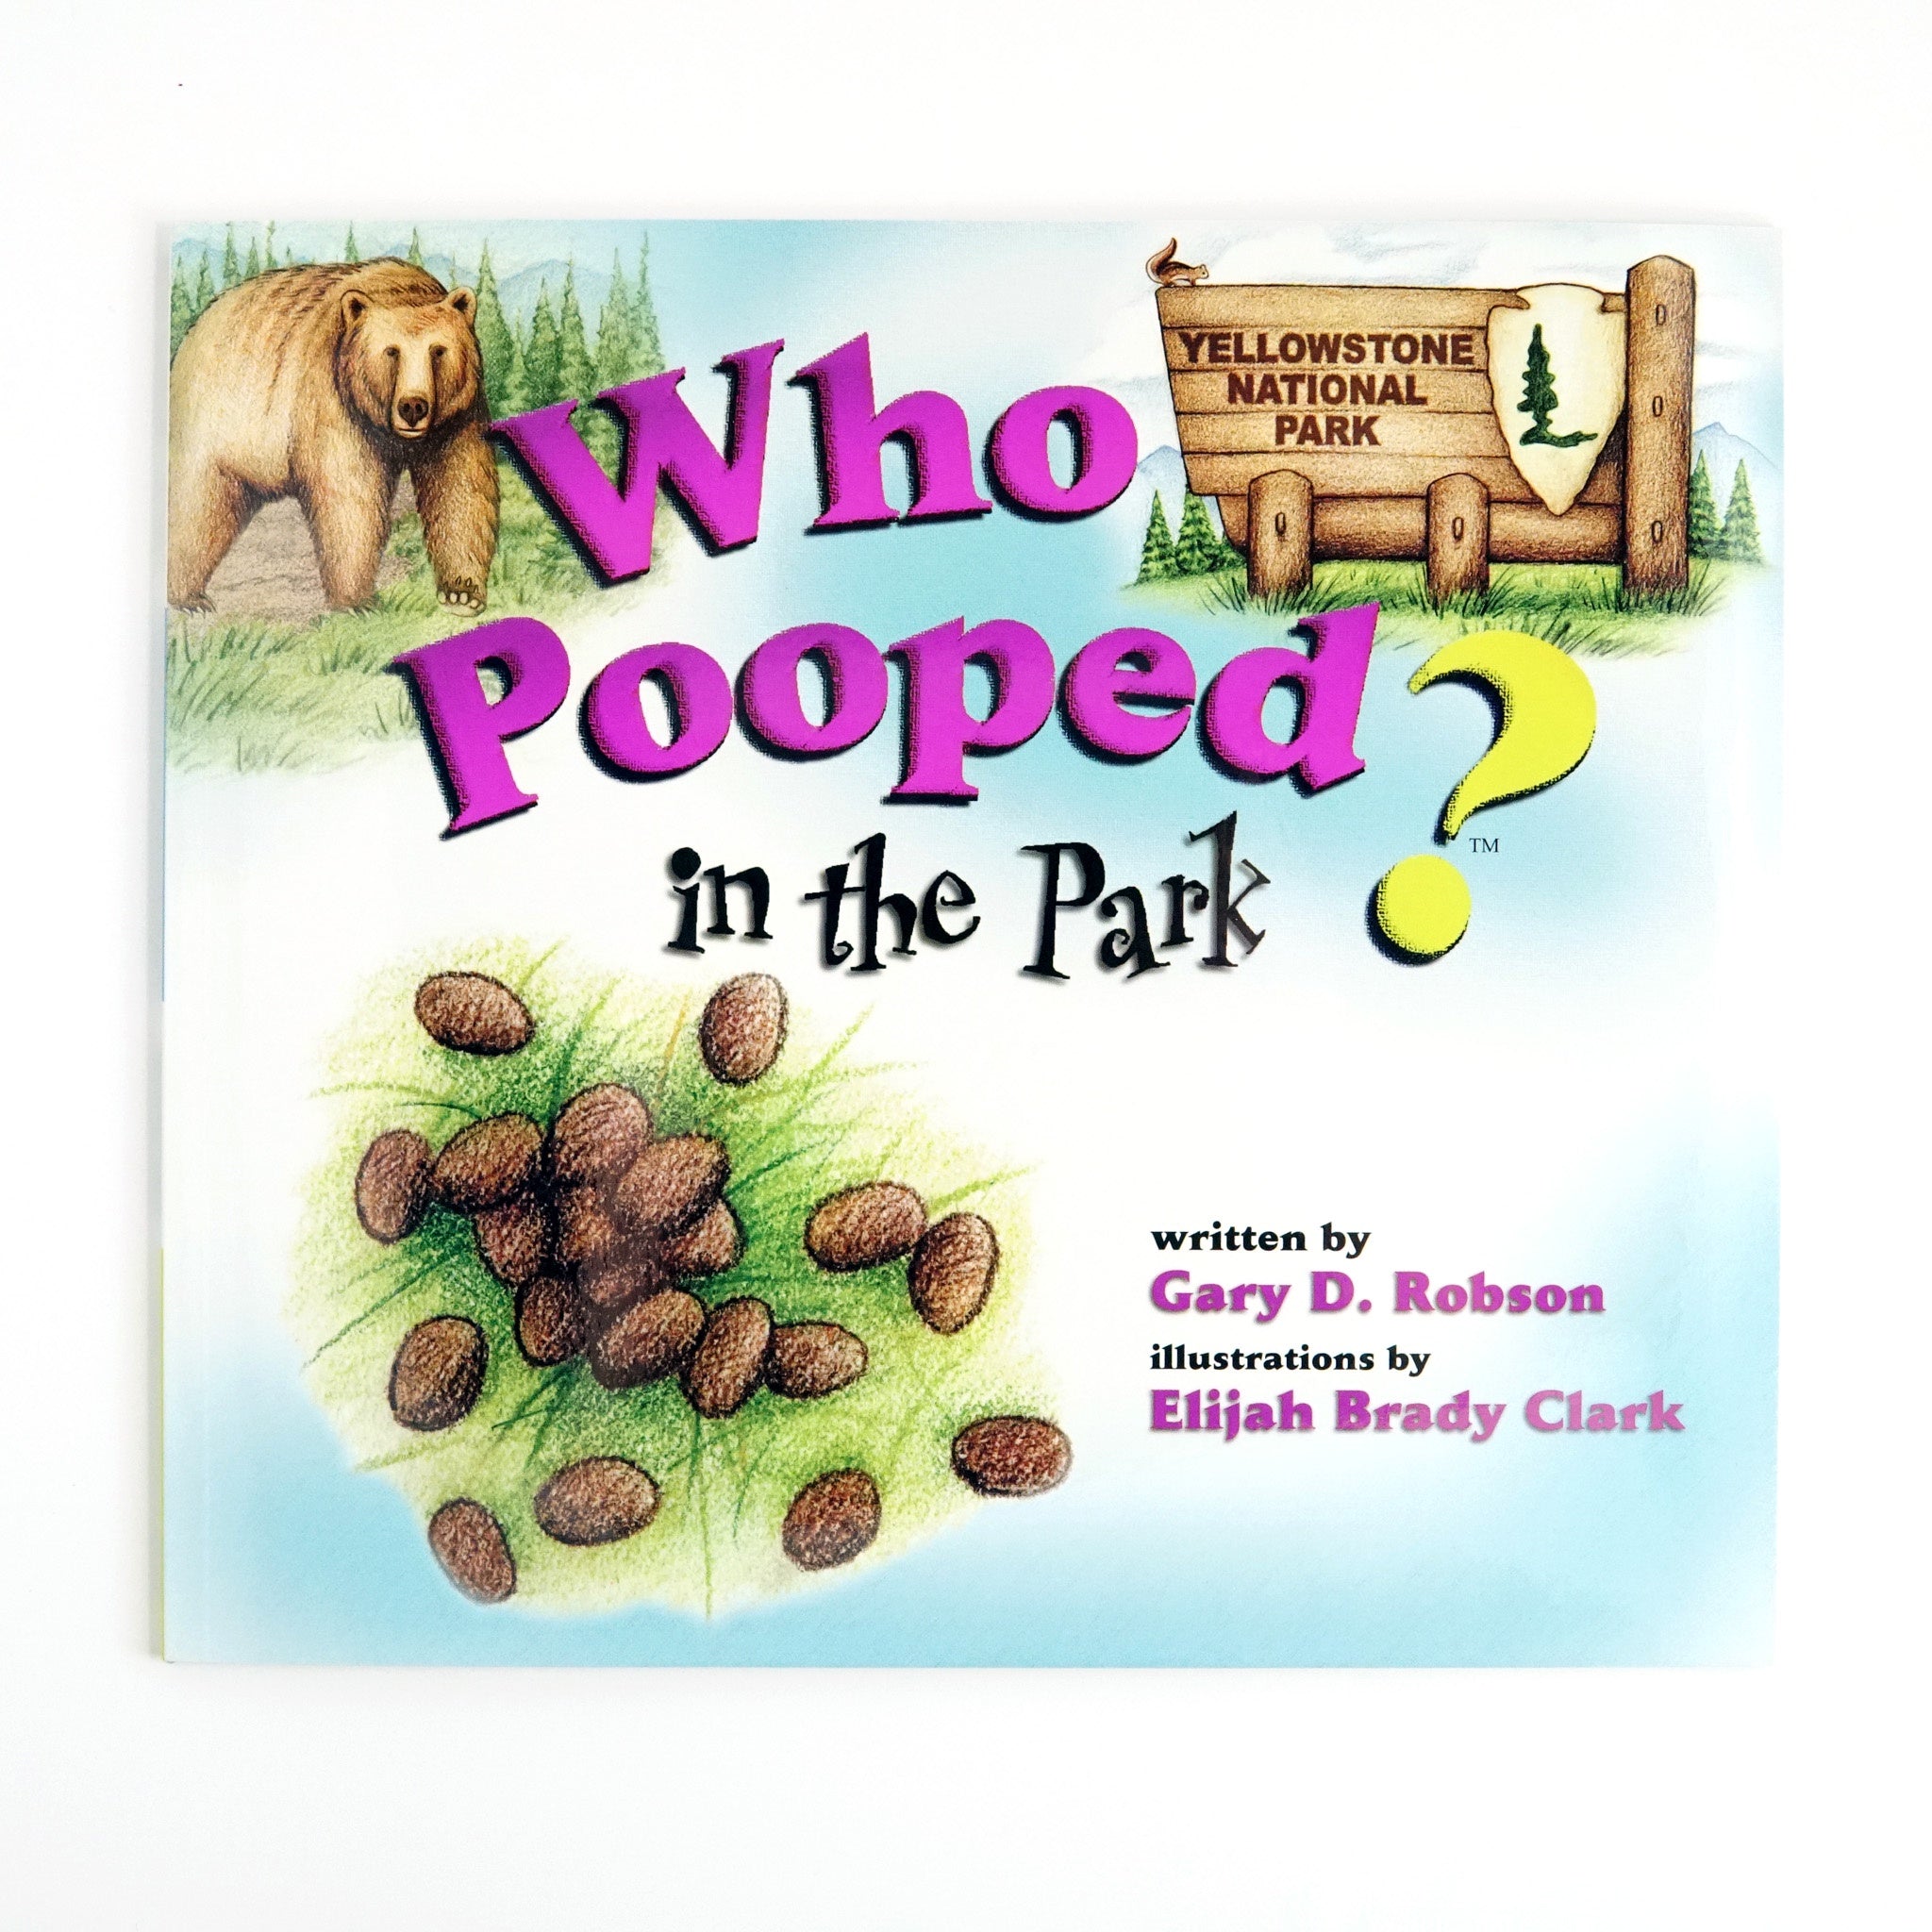 BK 19 WHO POOPED IN THE PARK BY GARY D. ROBSON #21017722 D2 MAR24